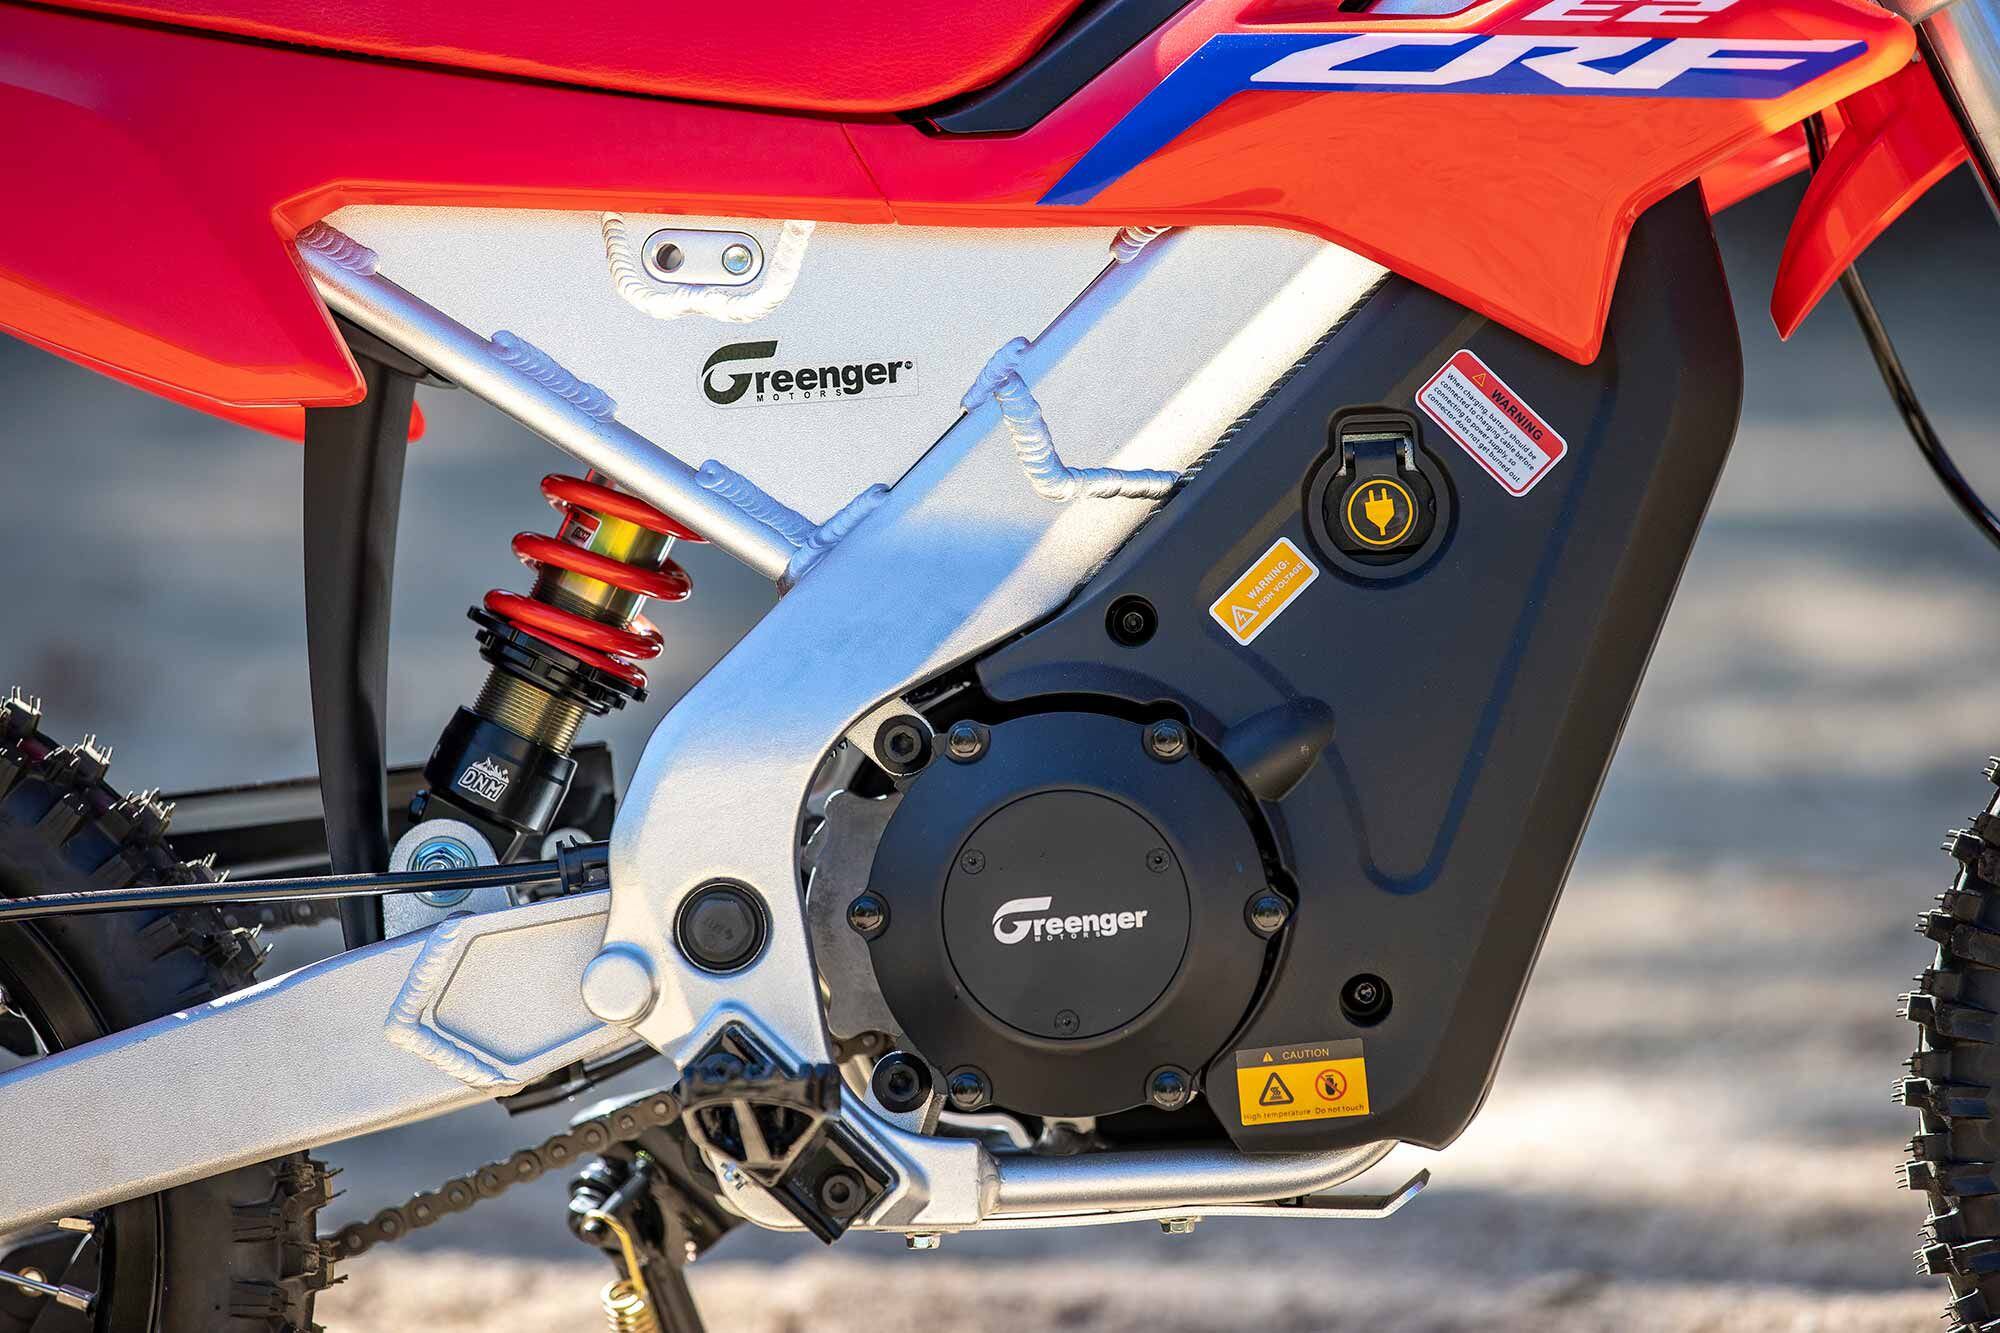 CRF-E2 battery uses a separate charger that plugs into a convenient port on the right side. The standard 5-amp charger tops a fully depleted battery in four hours.